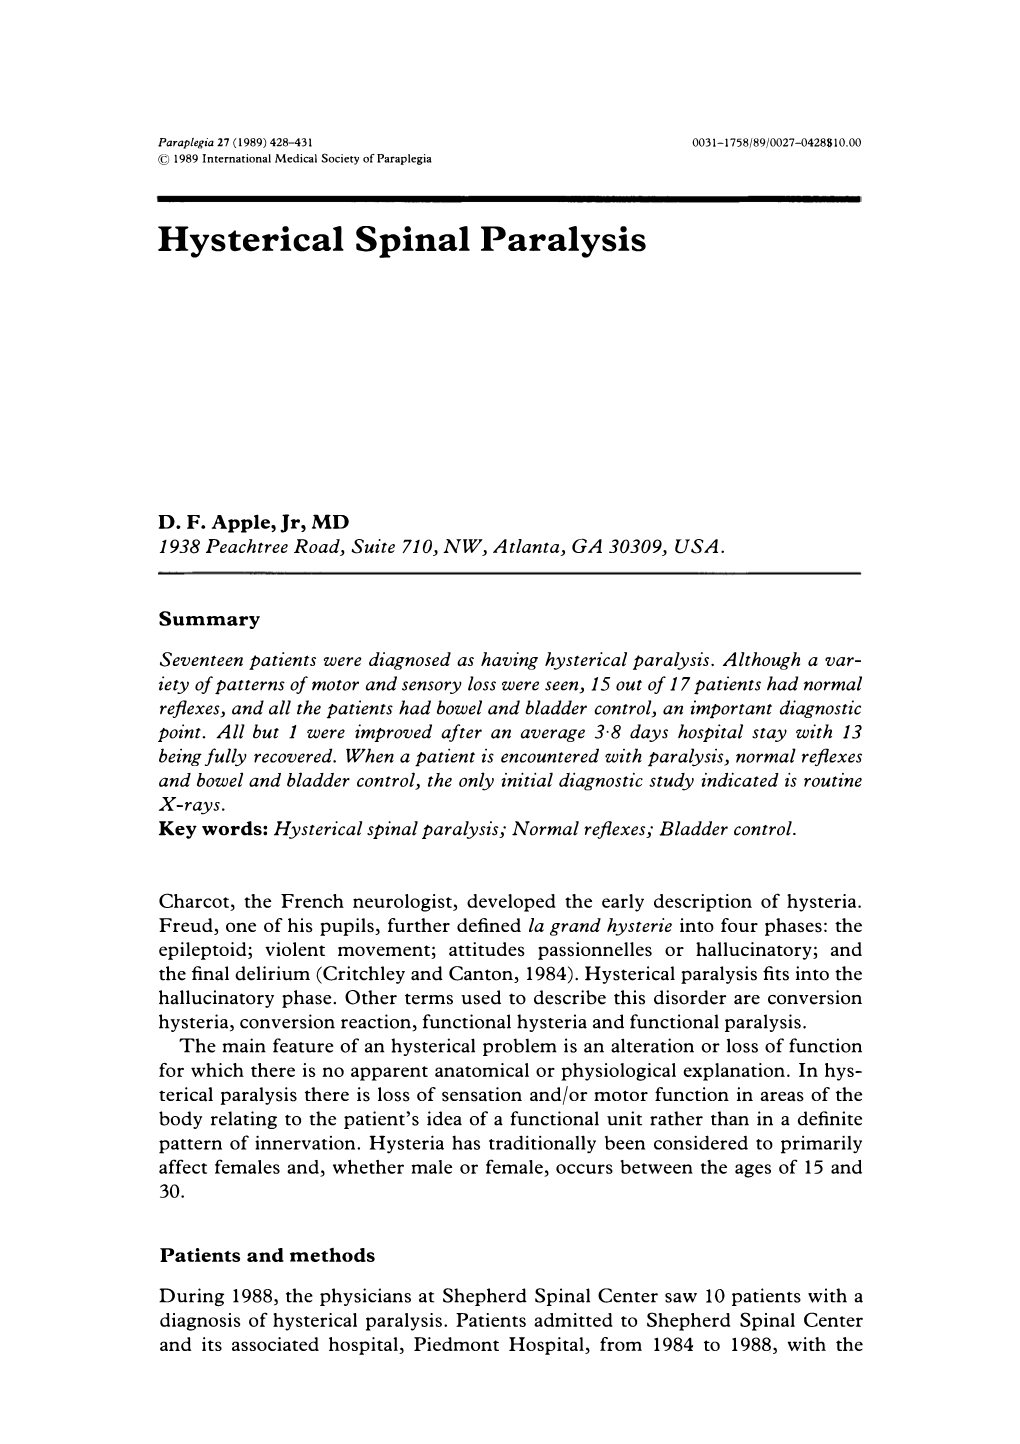 Hysterical Spinal Paralysis